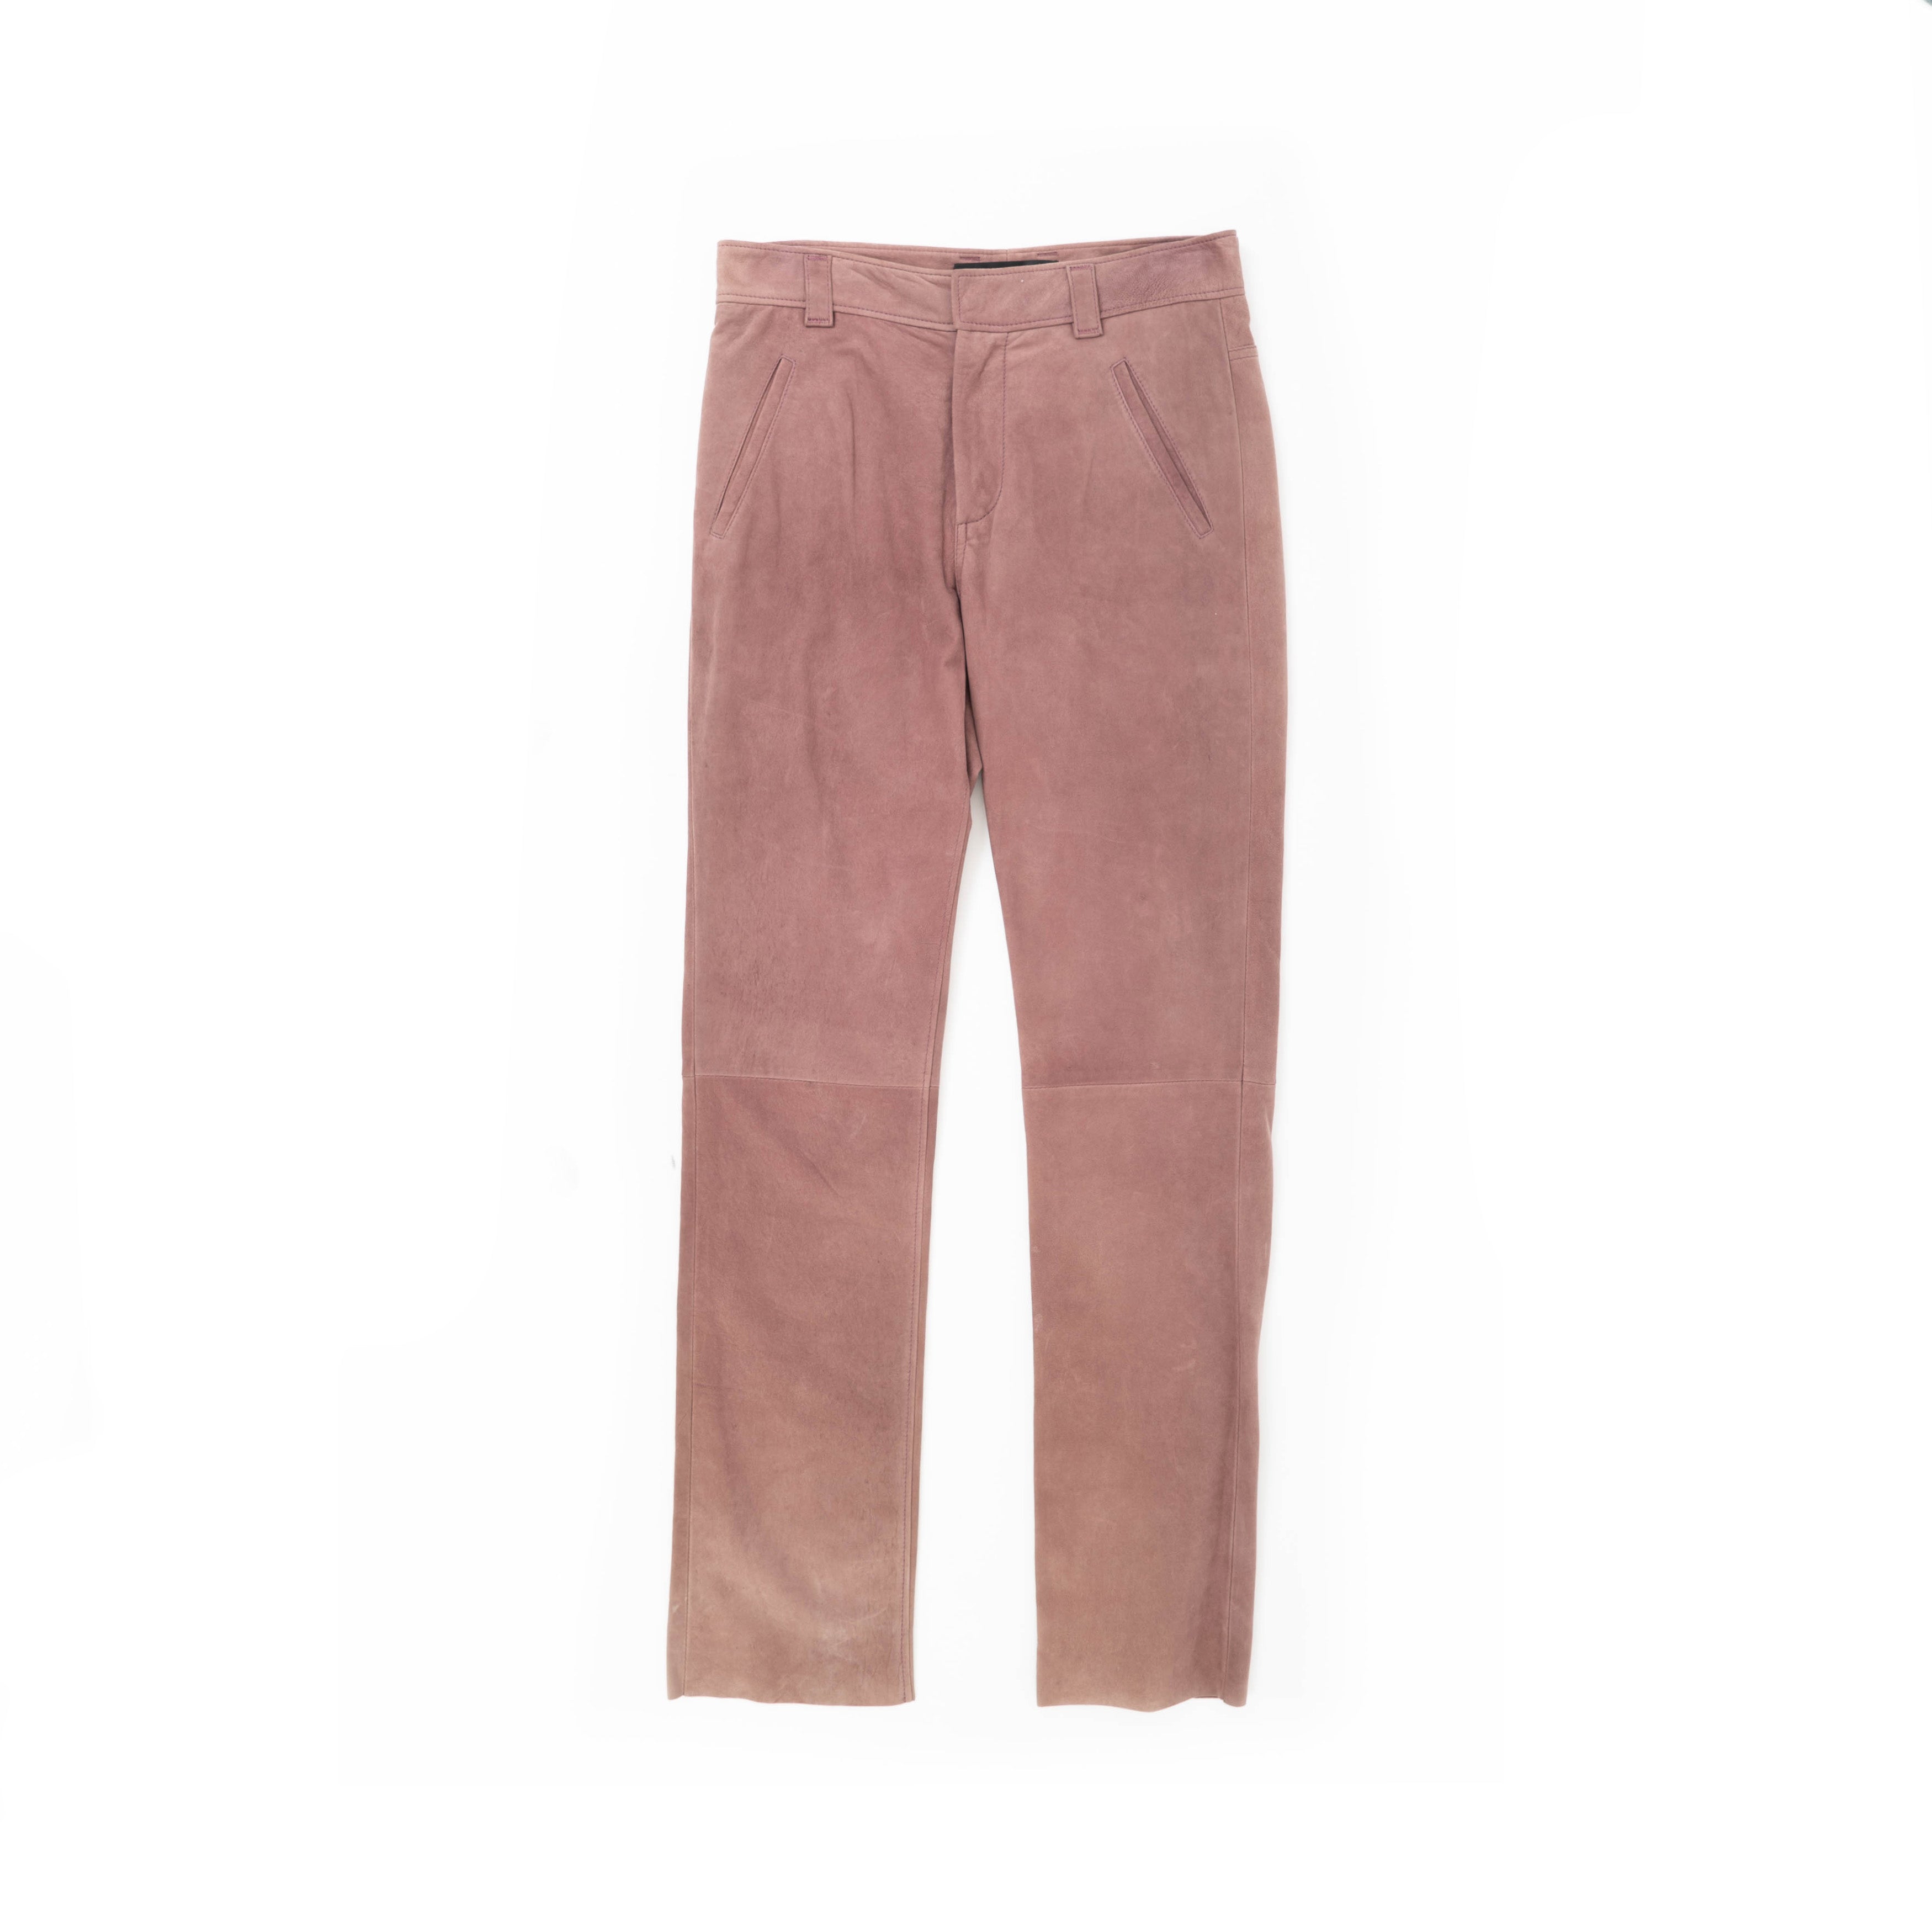 SS11 Rose Lamb Leather Trousers